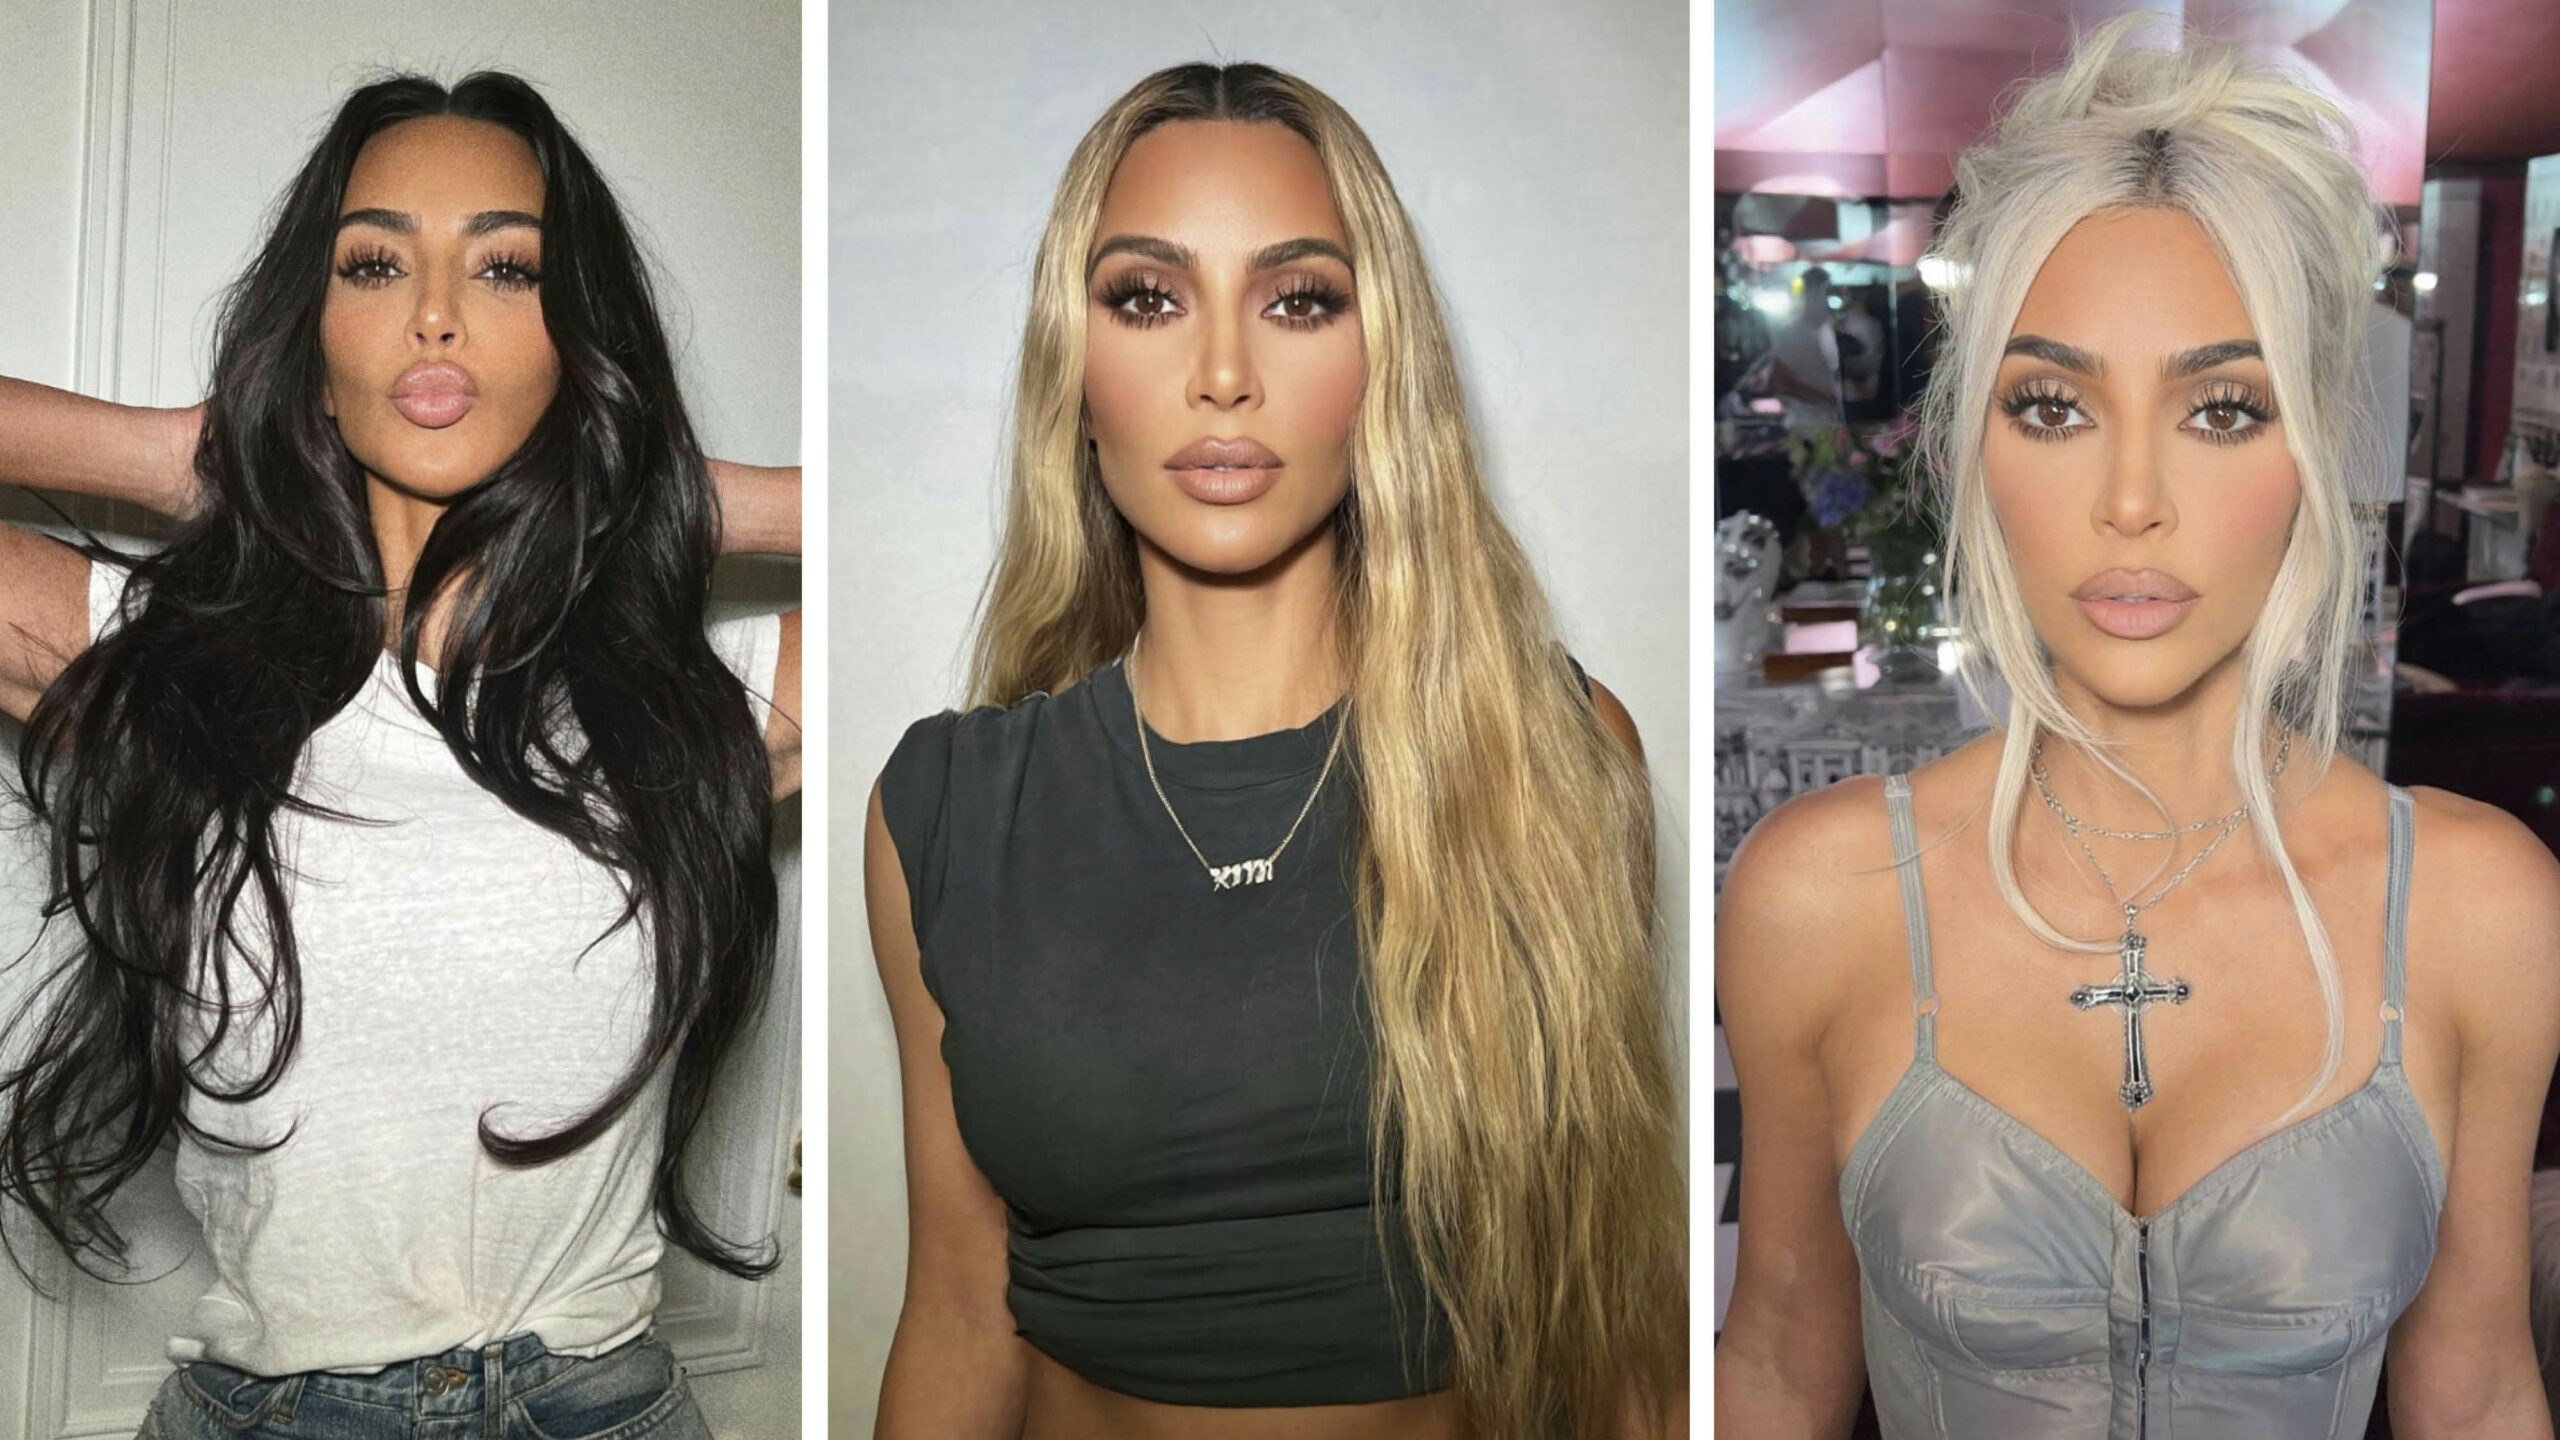 Is Kim Kardashian returning to her influencer roots?